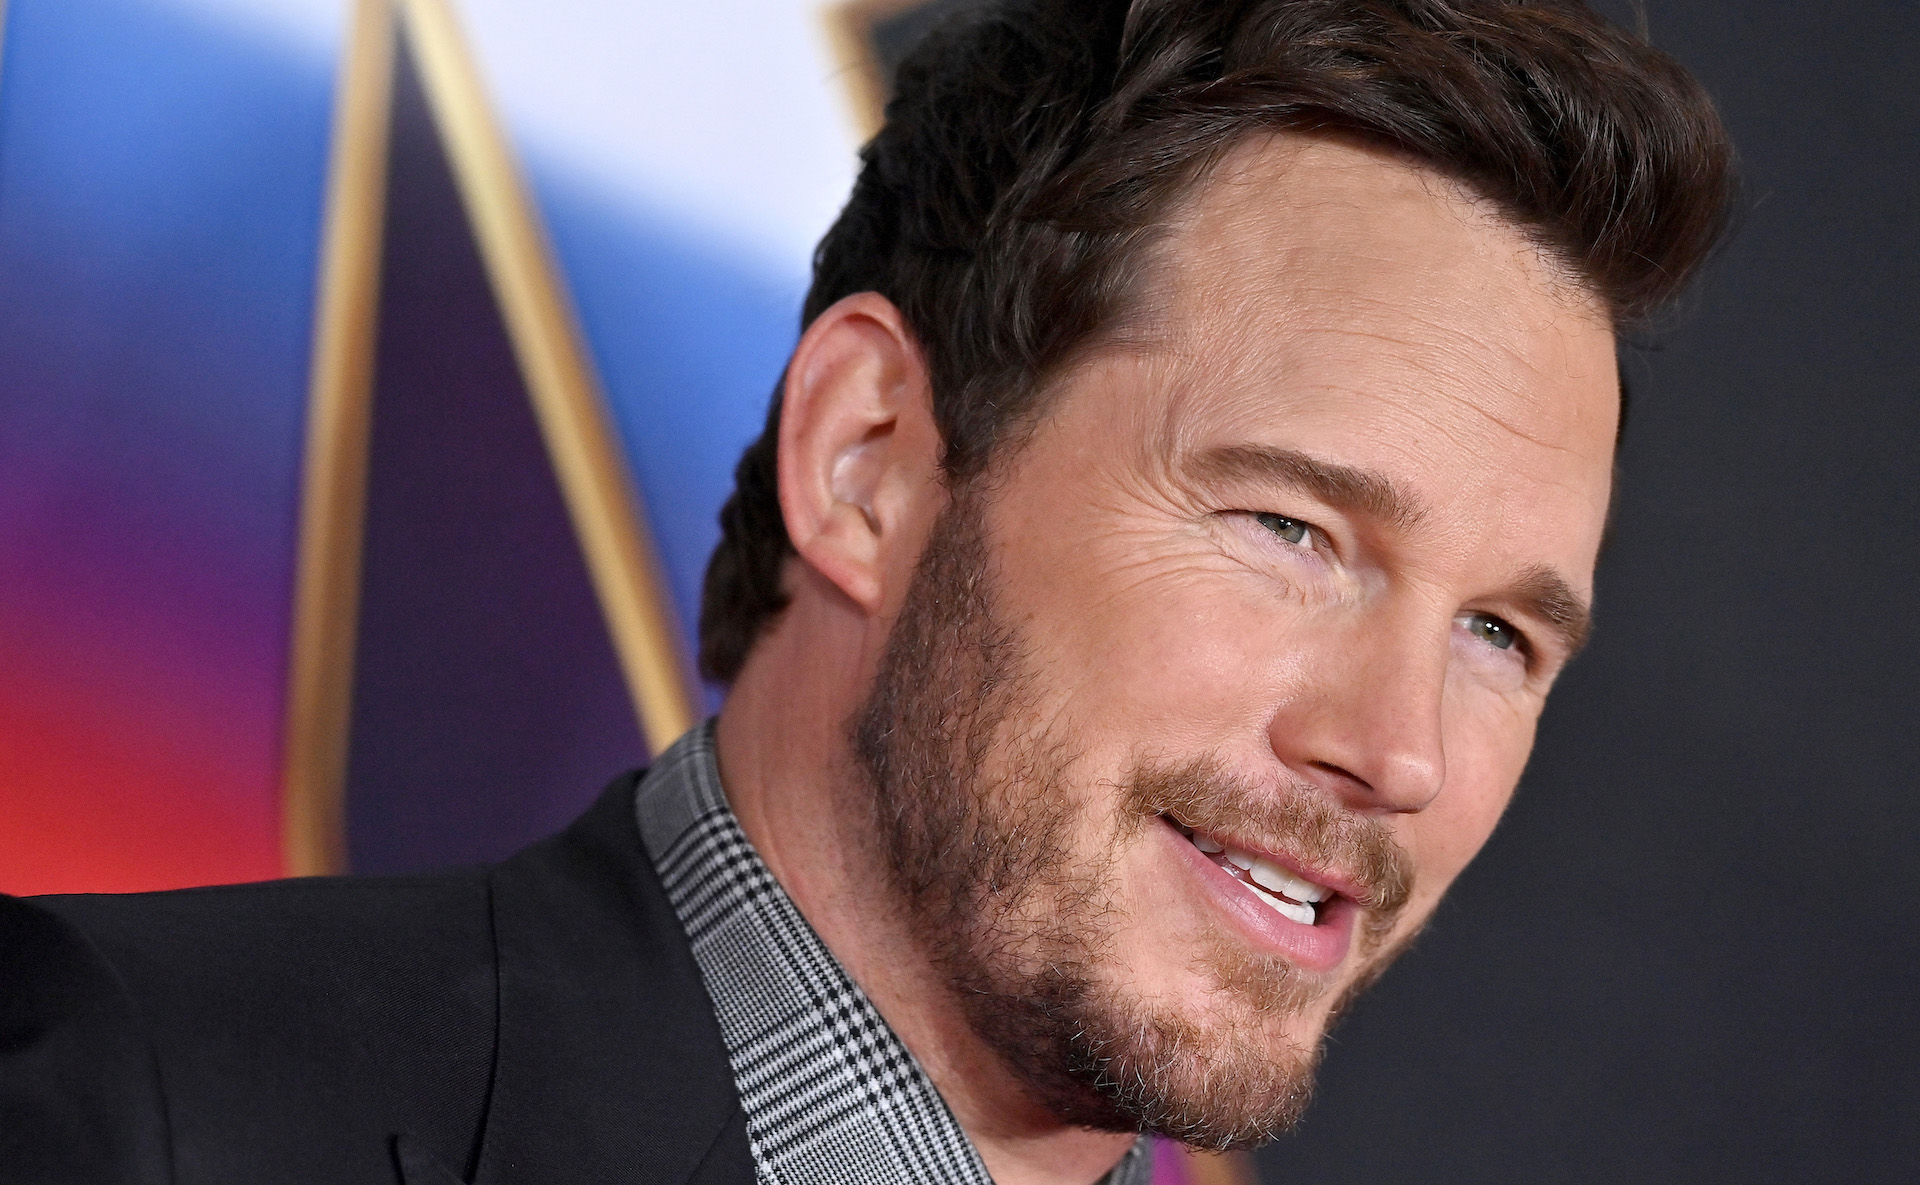 Chris Pratt Reveals How He Got Ripped the Healthy Way This Time